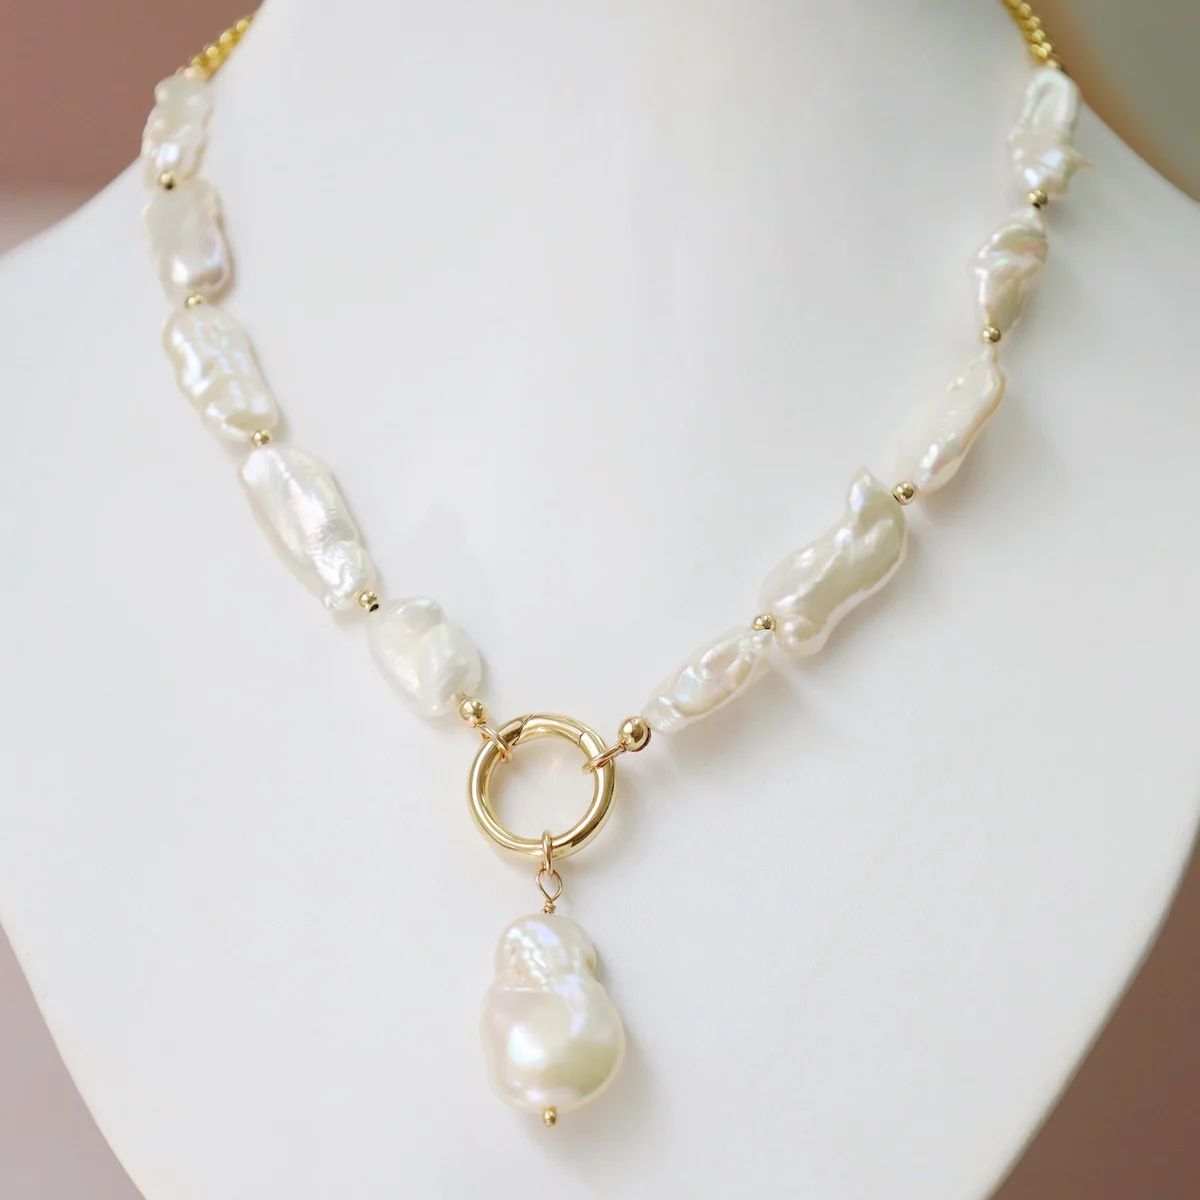 First Class Necklace by Kelly Saks | Taudrey